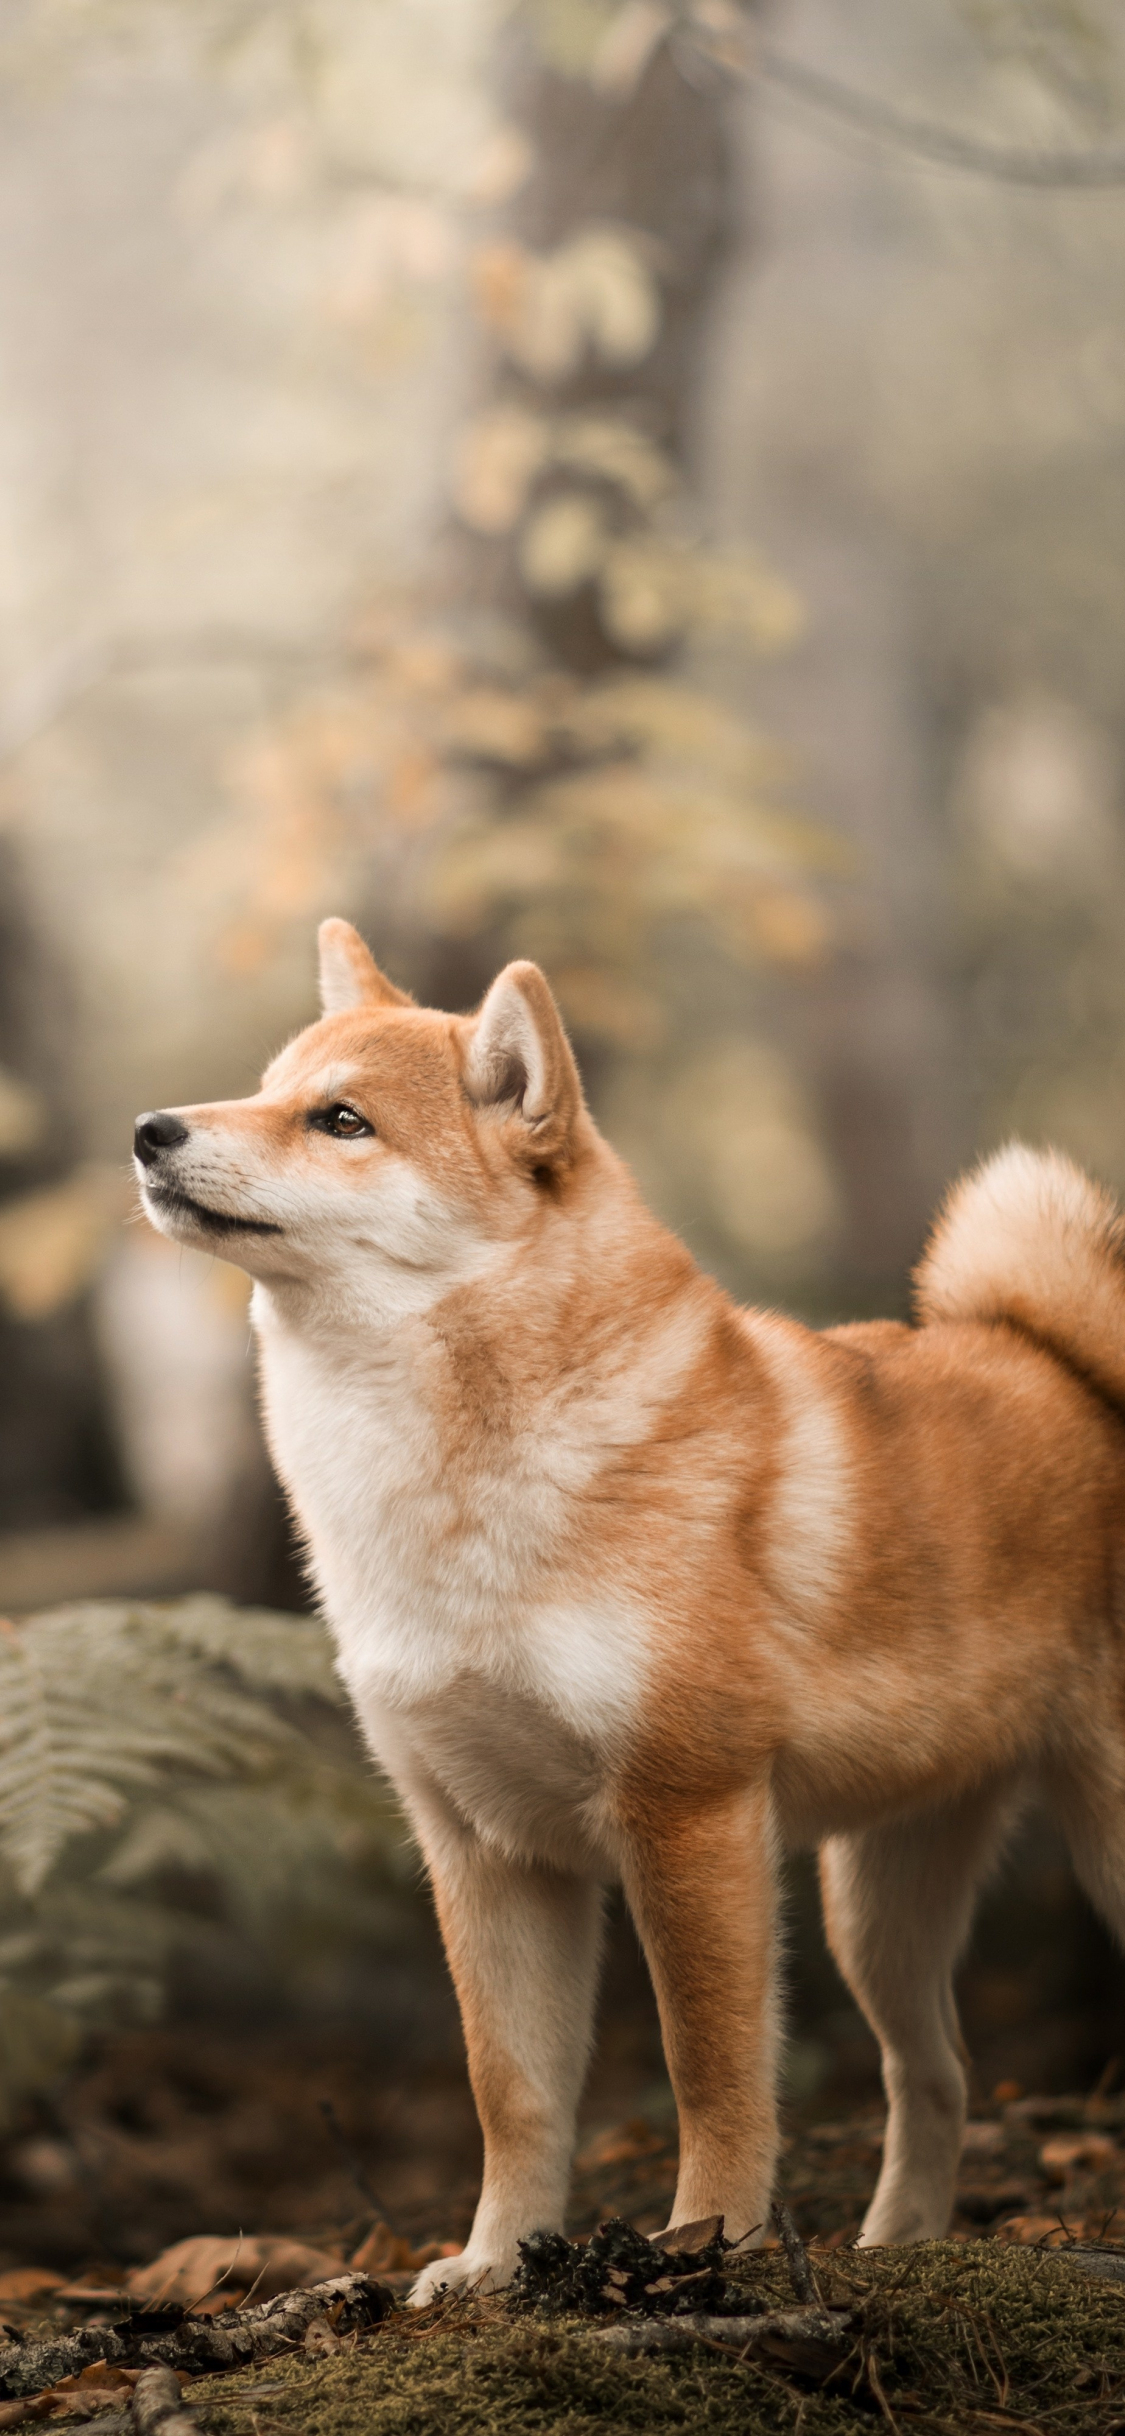 1125x2436 Download shiba inu, confident, dog, outdoor wallpaper, iphone x, hd image, background, 5335